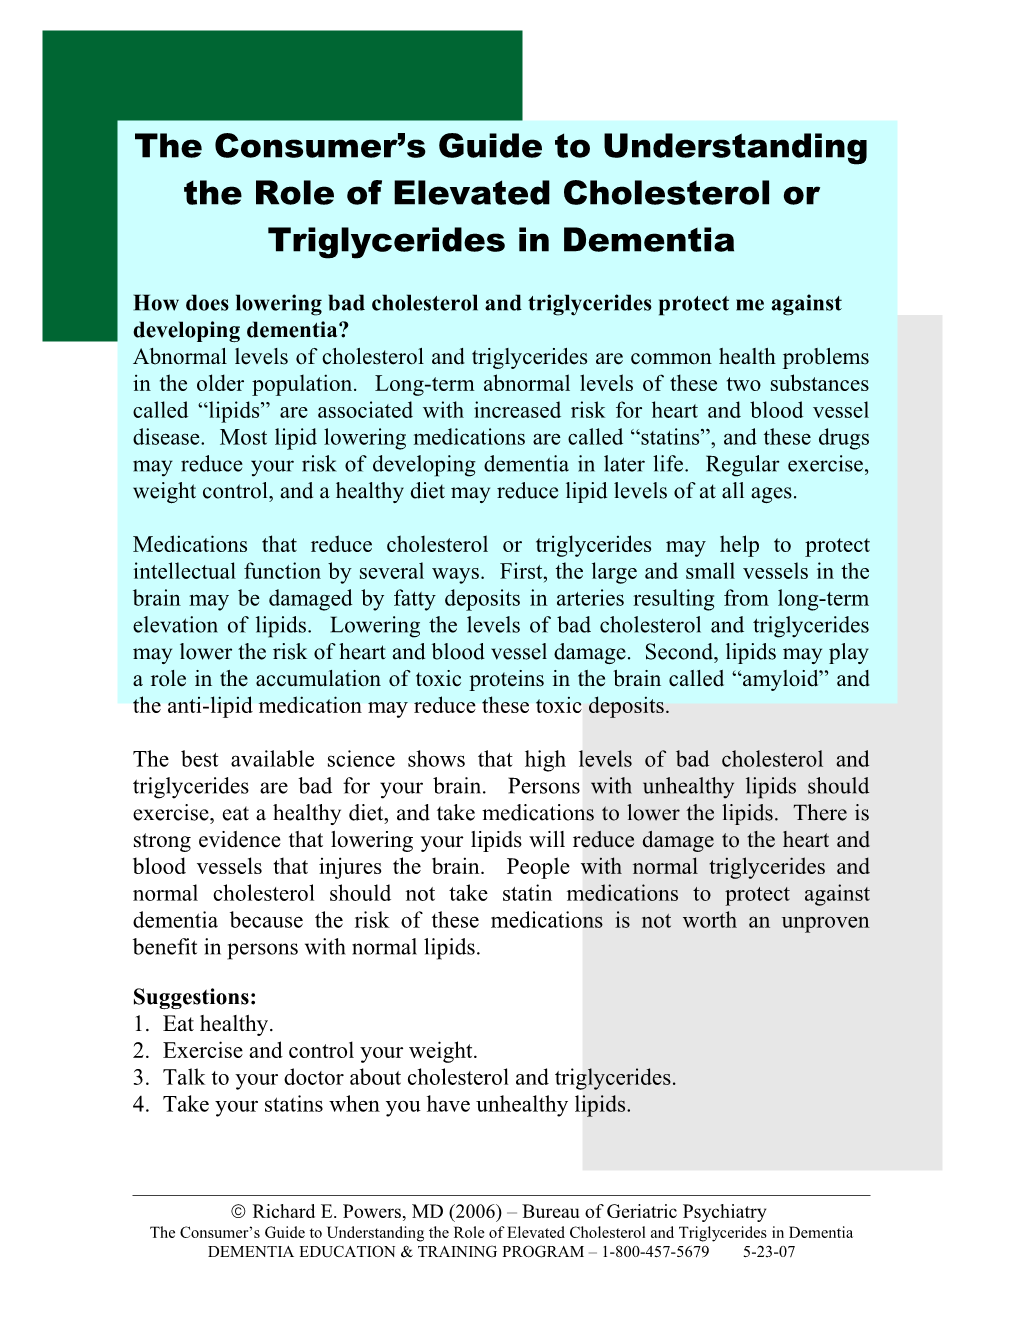 The Consumer S Guide to Understanding the Role of Elevated Cholesterol Or Triglycerides